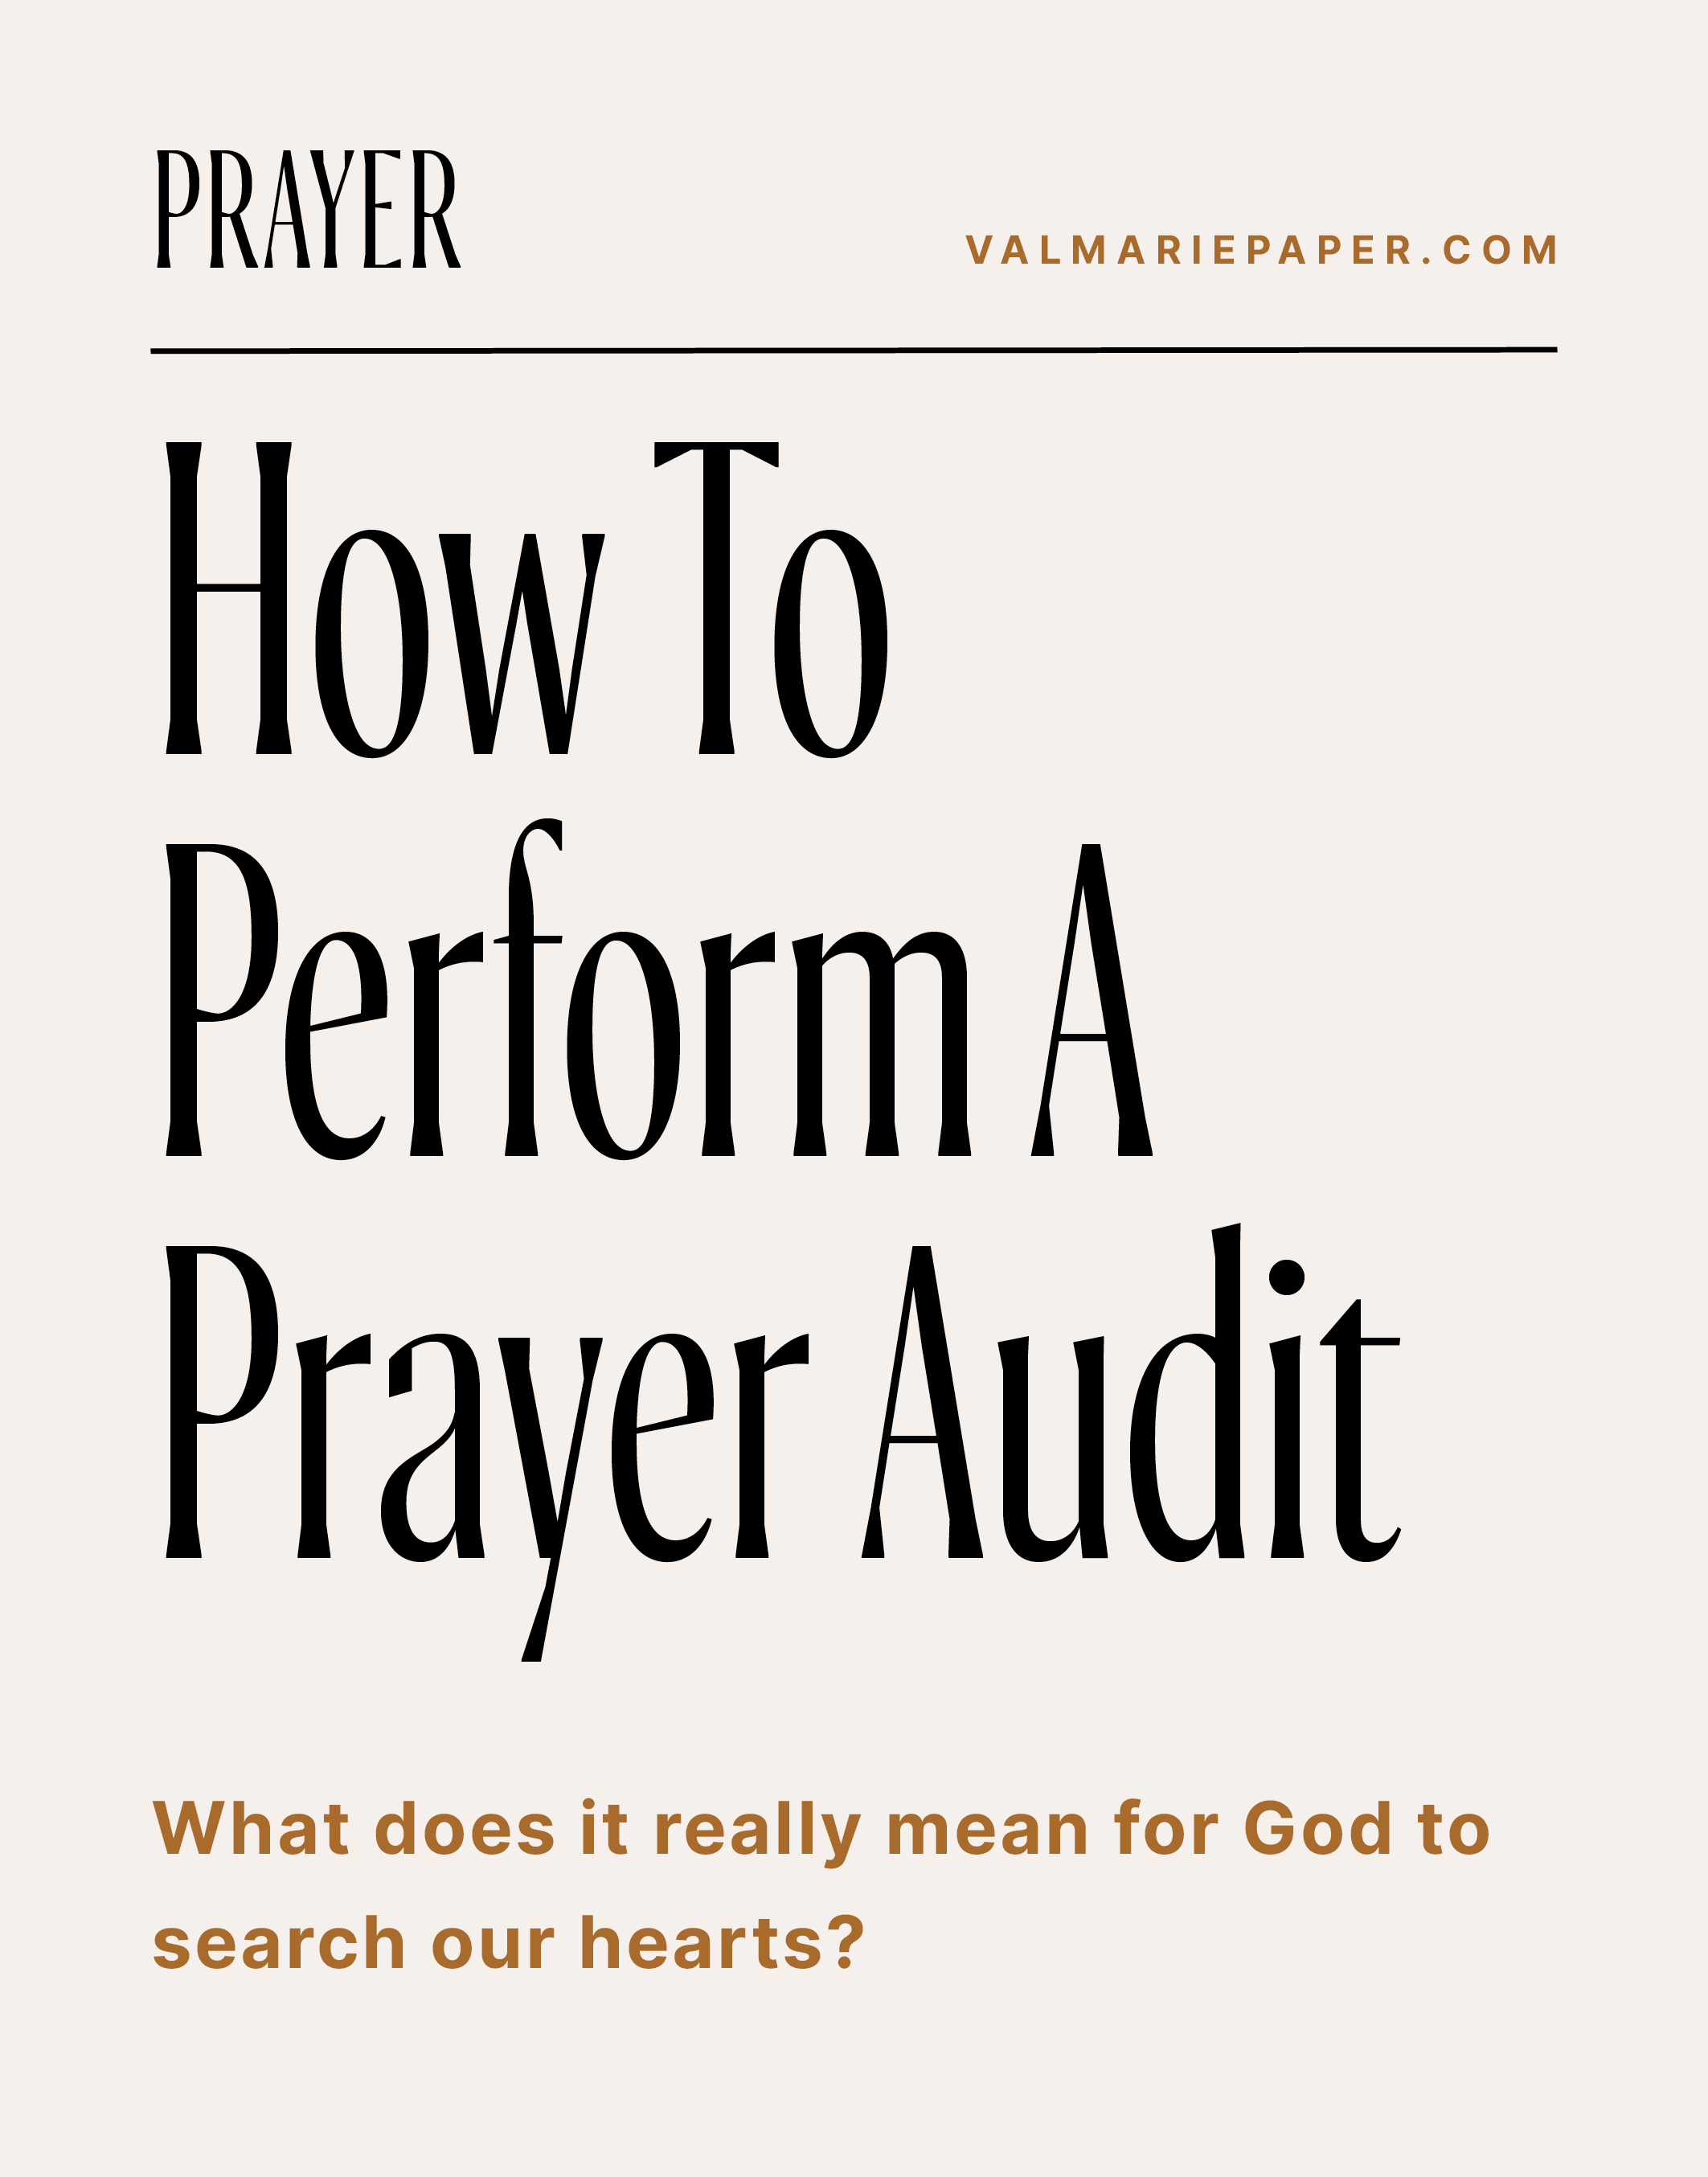 How to perform a prayer audit by Valerie Woerner, prayer journal, women's ministry, prayer, meditation, how to make a prayer journal, prayer warrior, war room, Bible study, tools, prayer notebook, how to pray